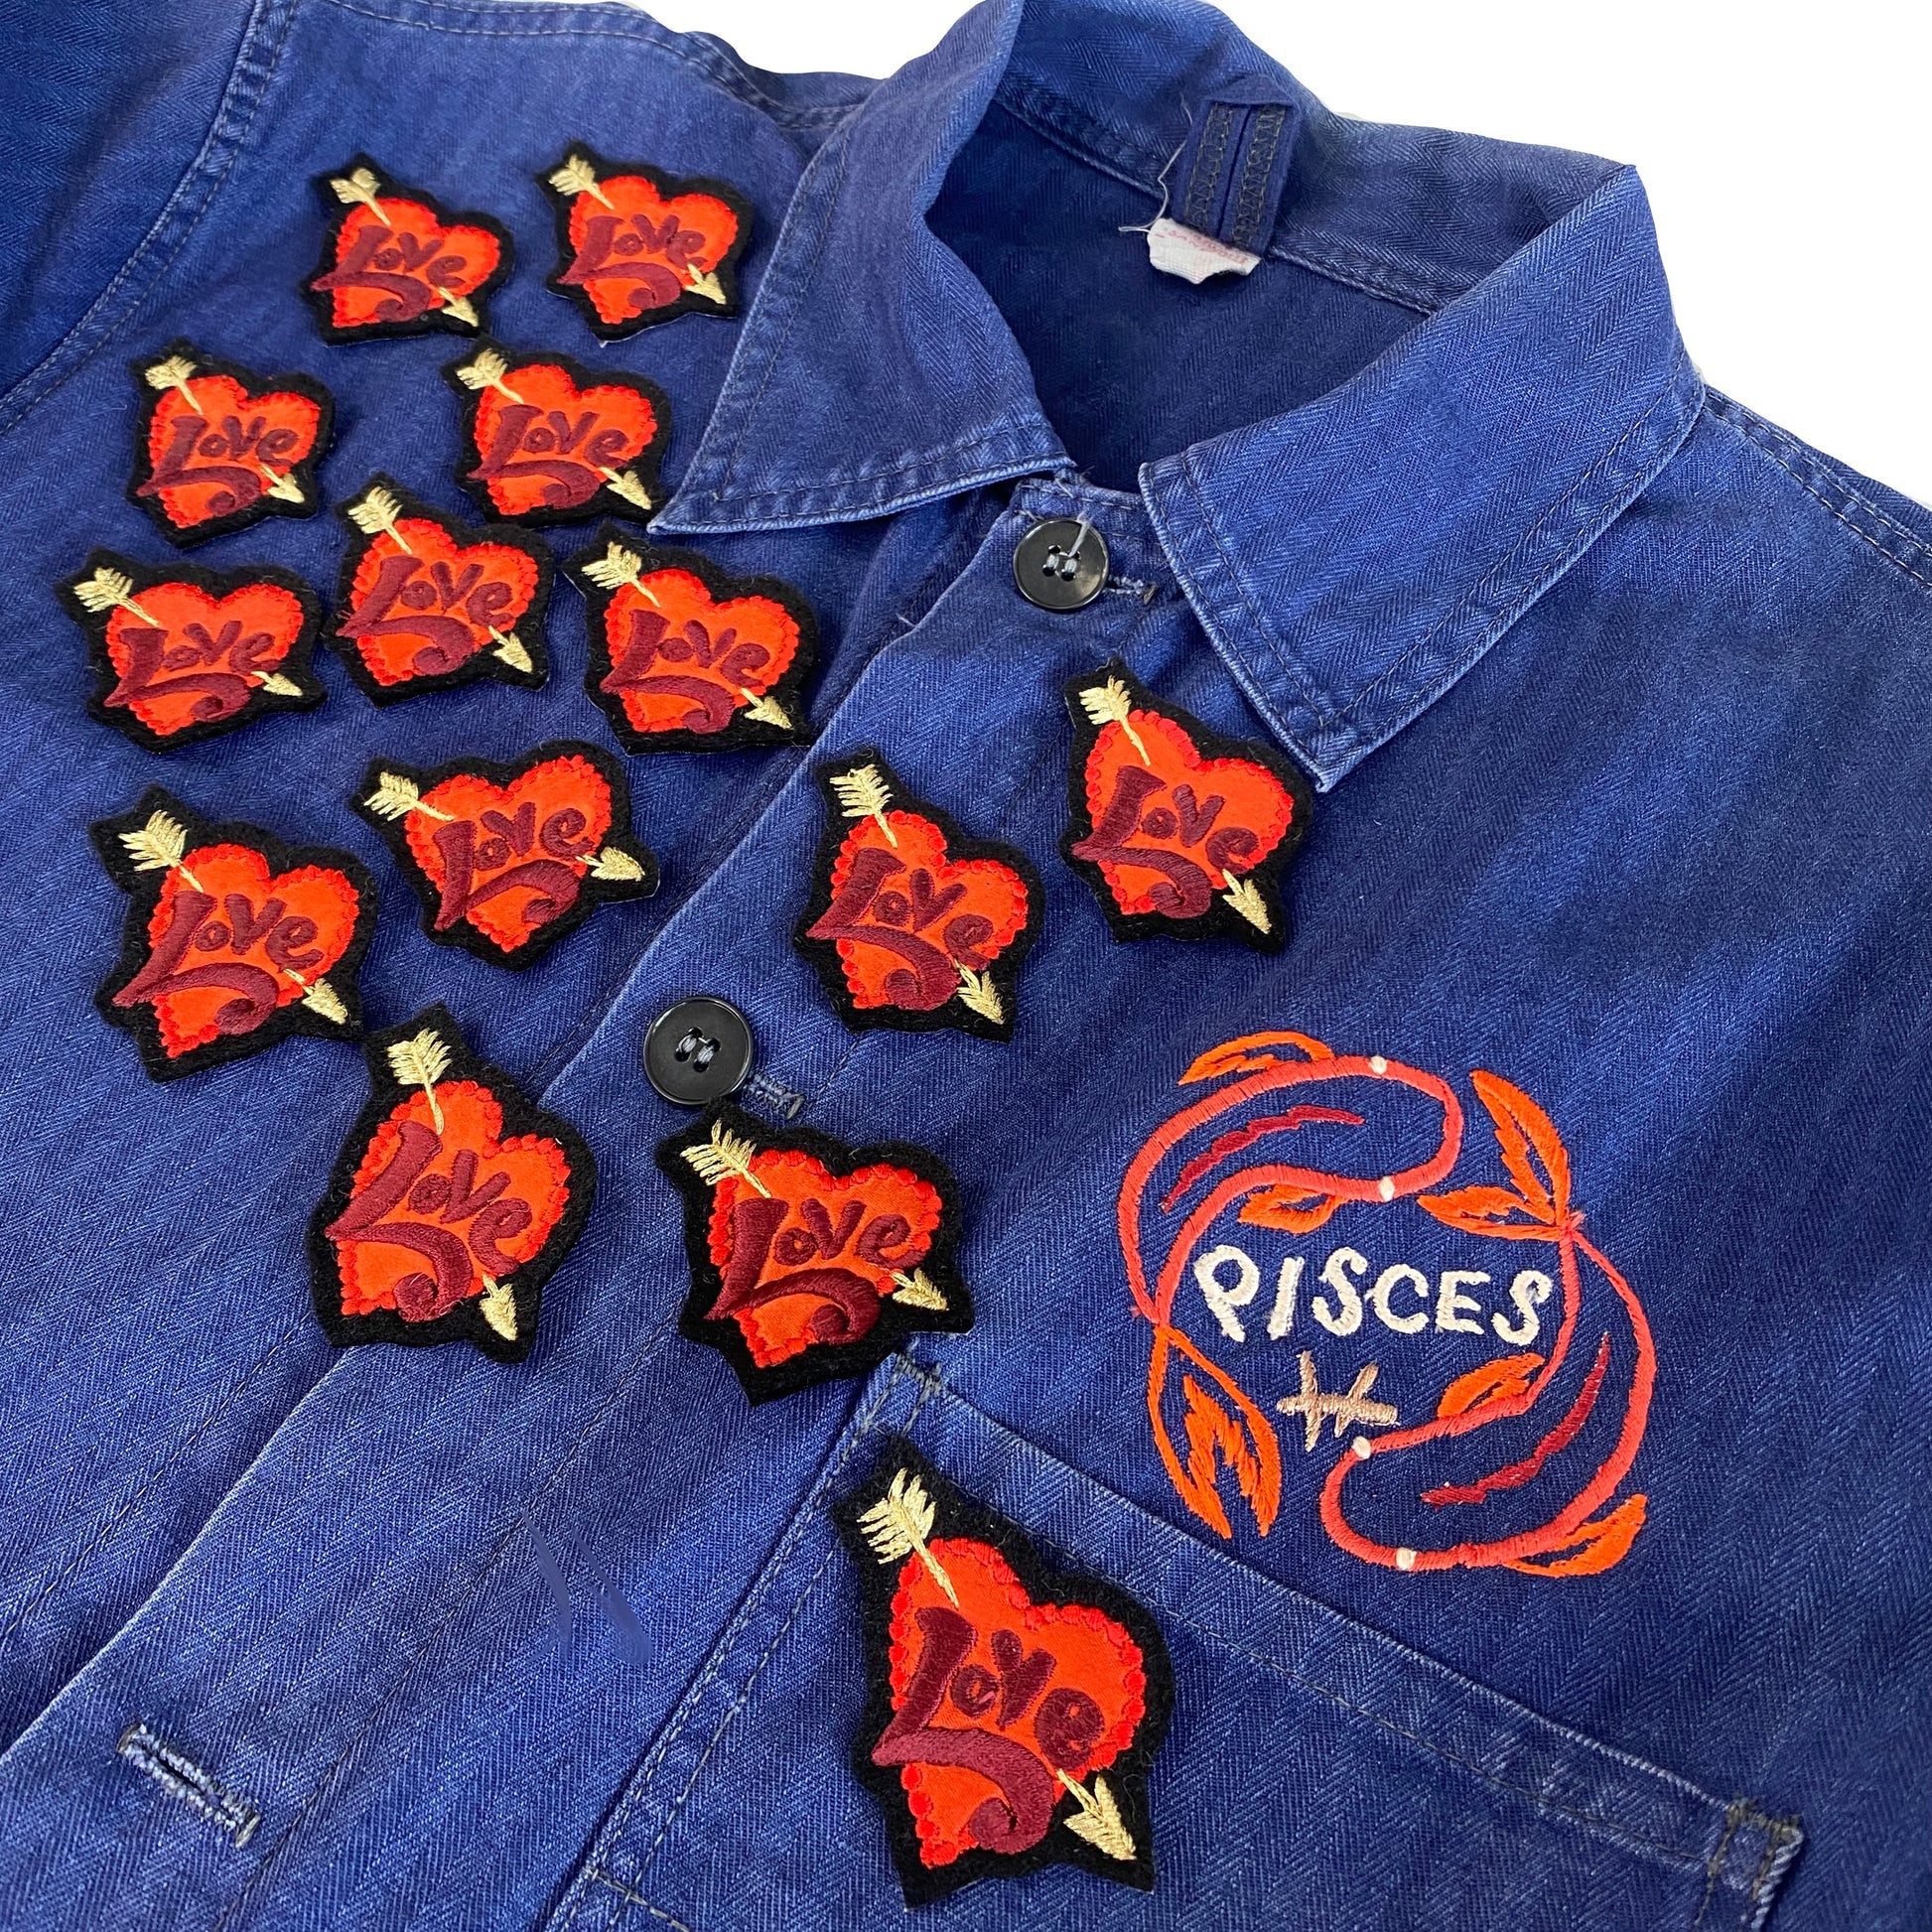 Mutiple tiny love embroidered patches shown scattered on front of blue jacket